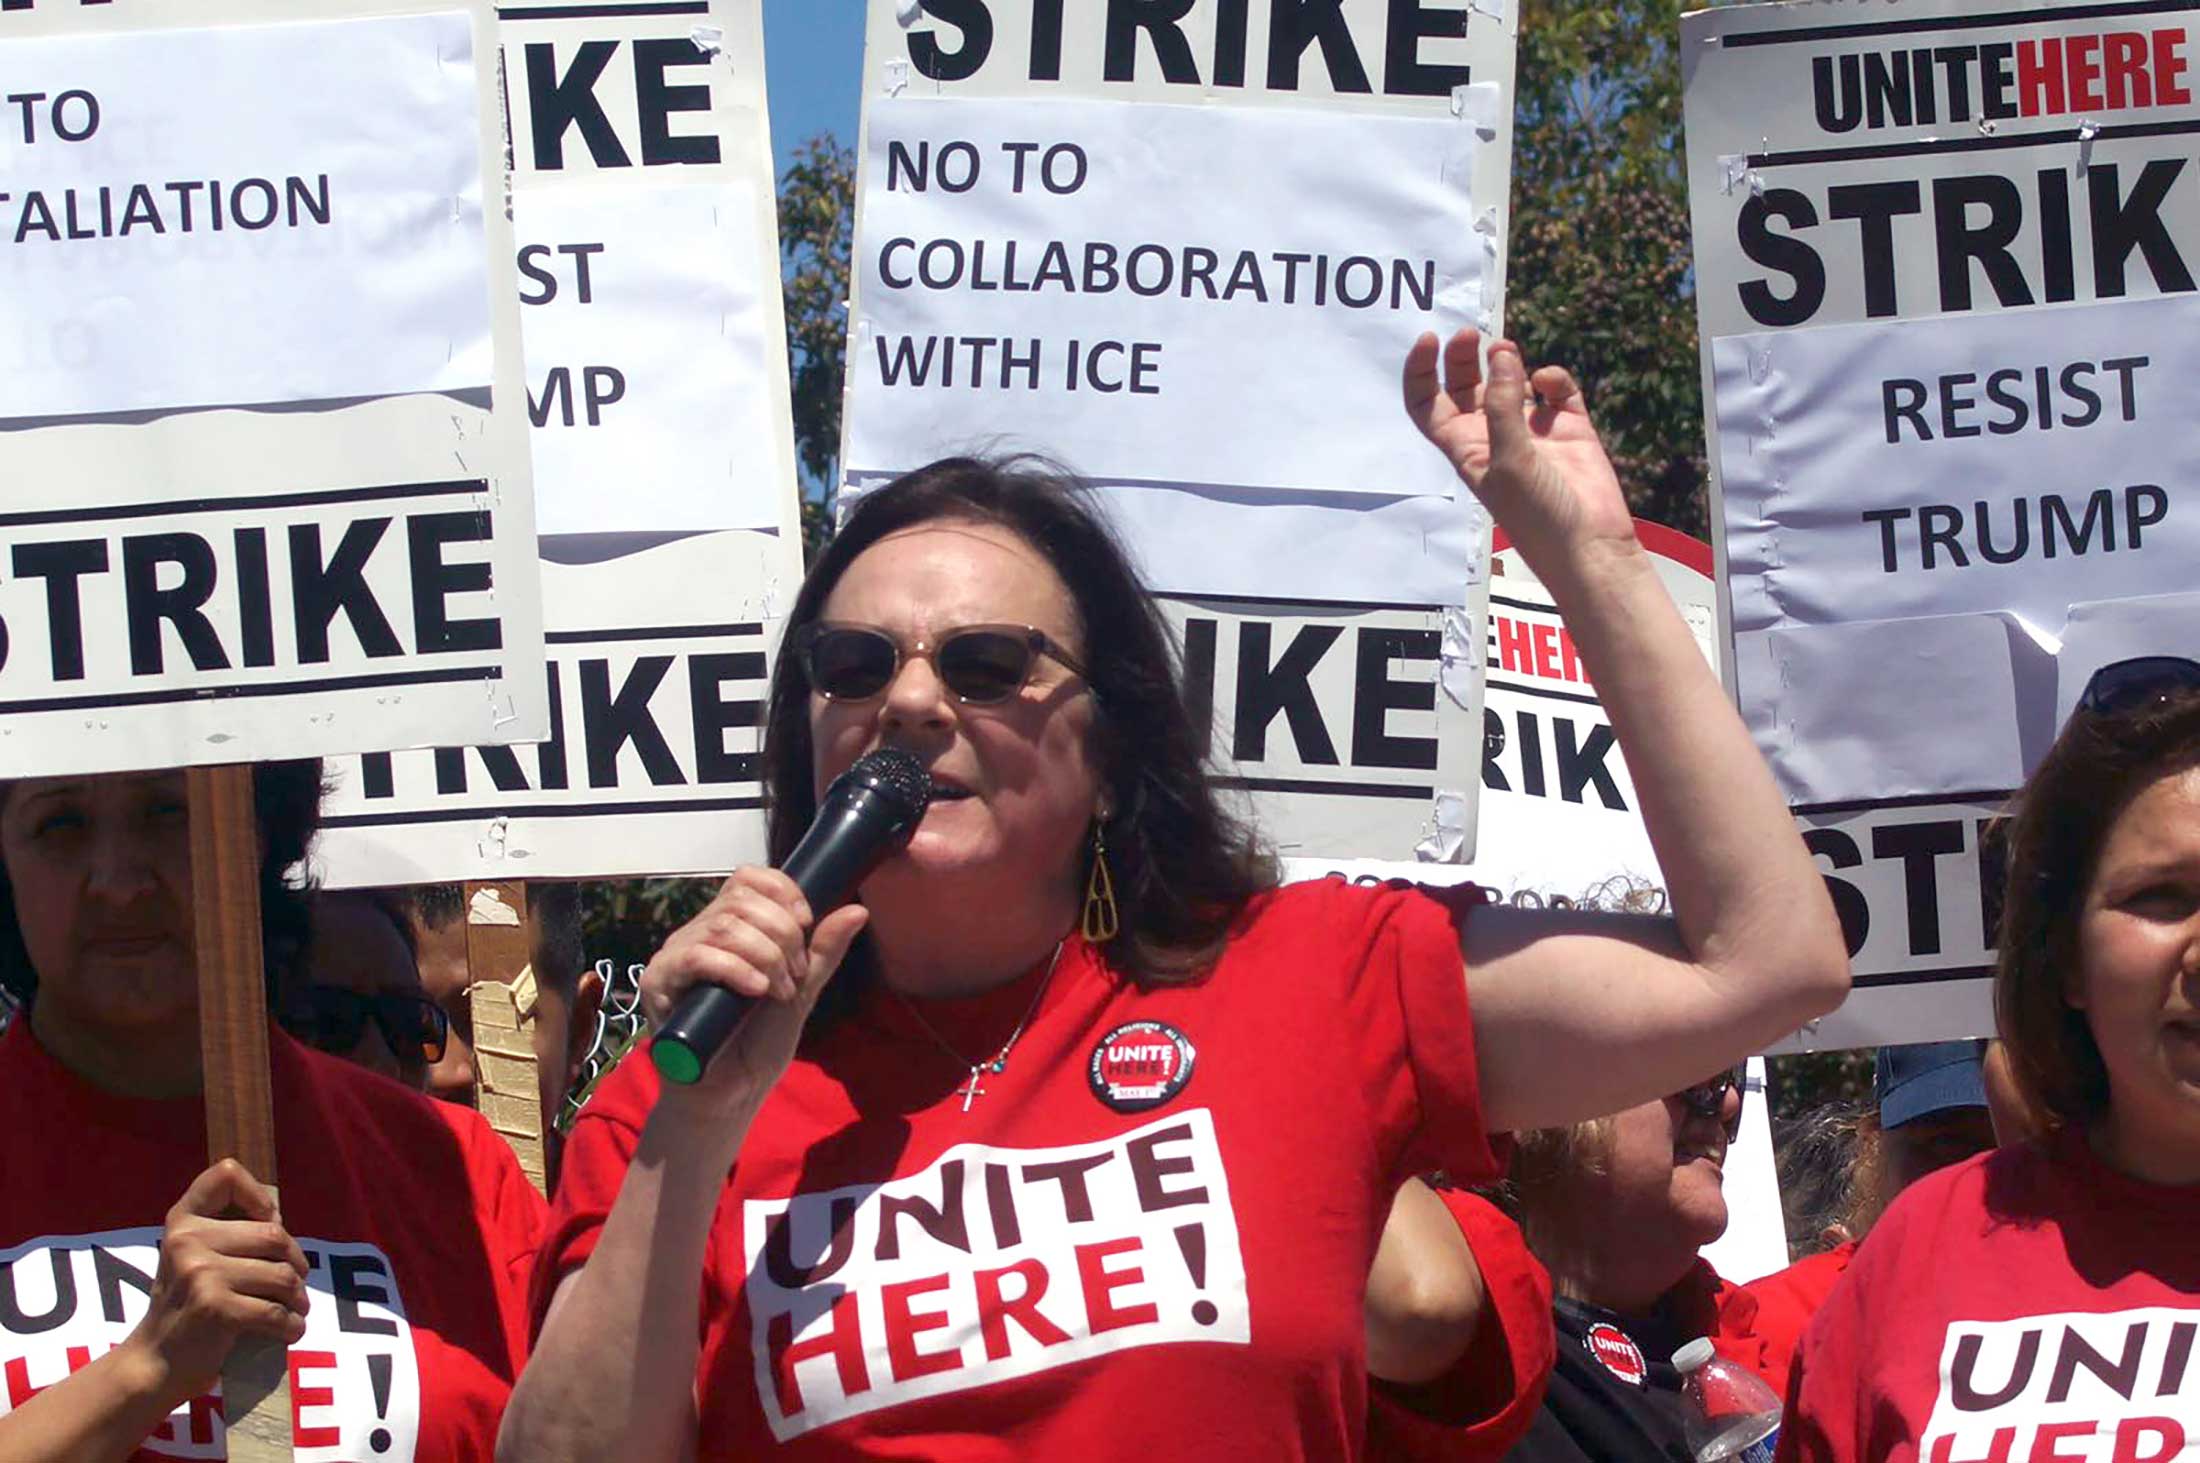 Unite Here’s Jo Marie Agriesti protests collaboration with ICE in Emeryville, Calif., on May 1, 2017.